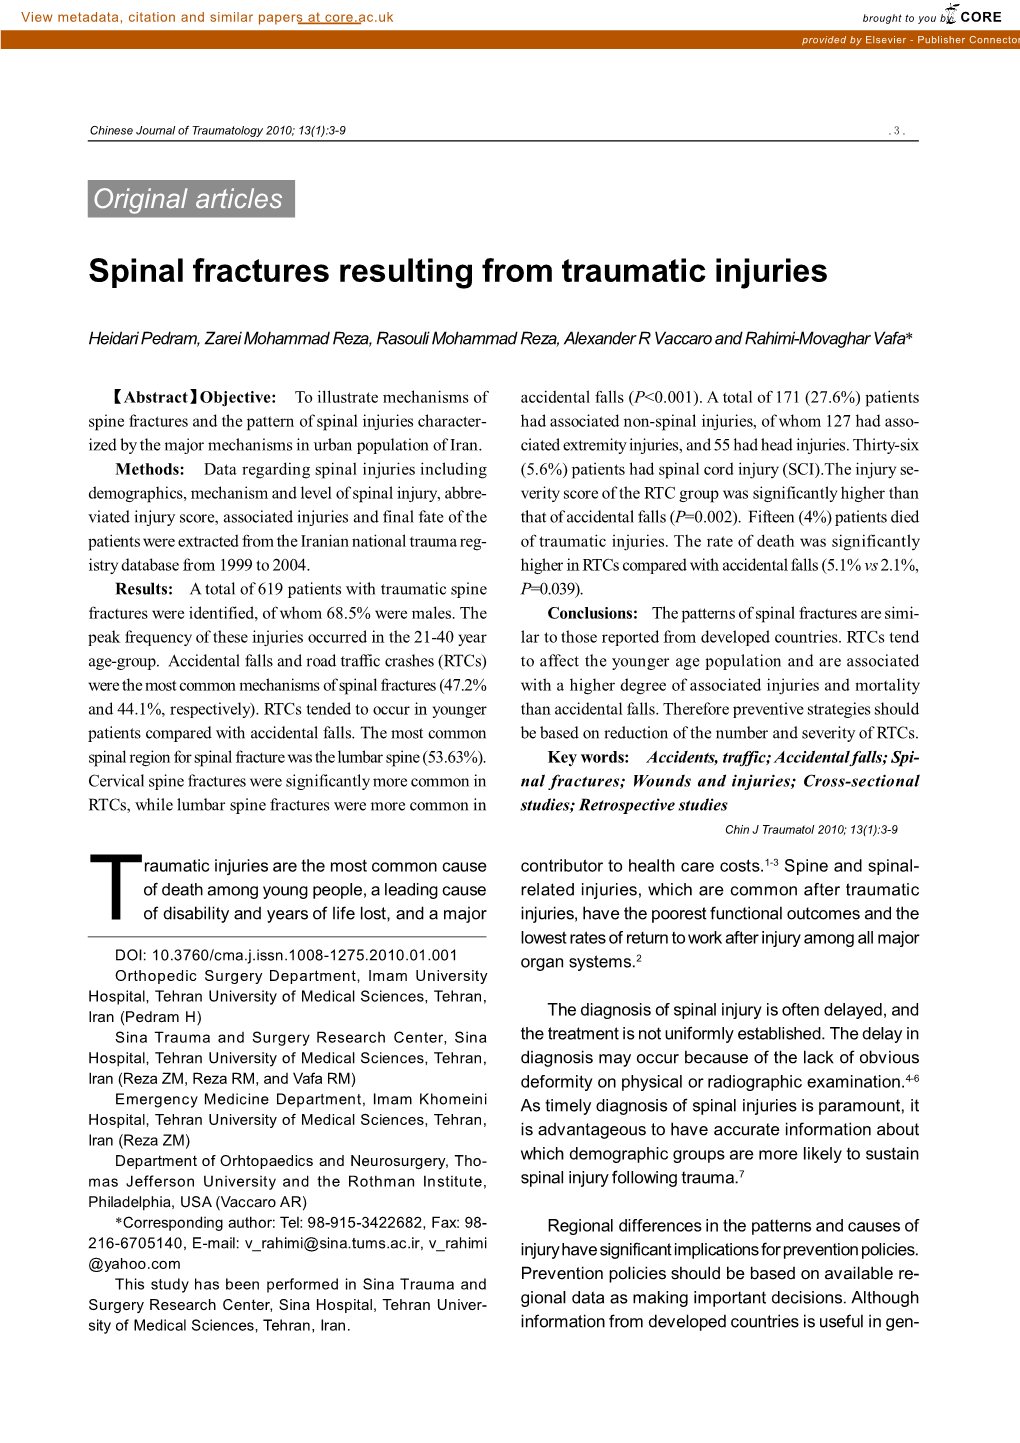 Spinal Fractures Resulting from Traumatic Injuries